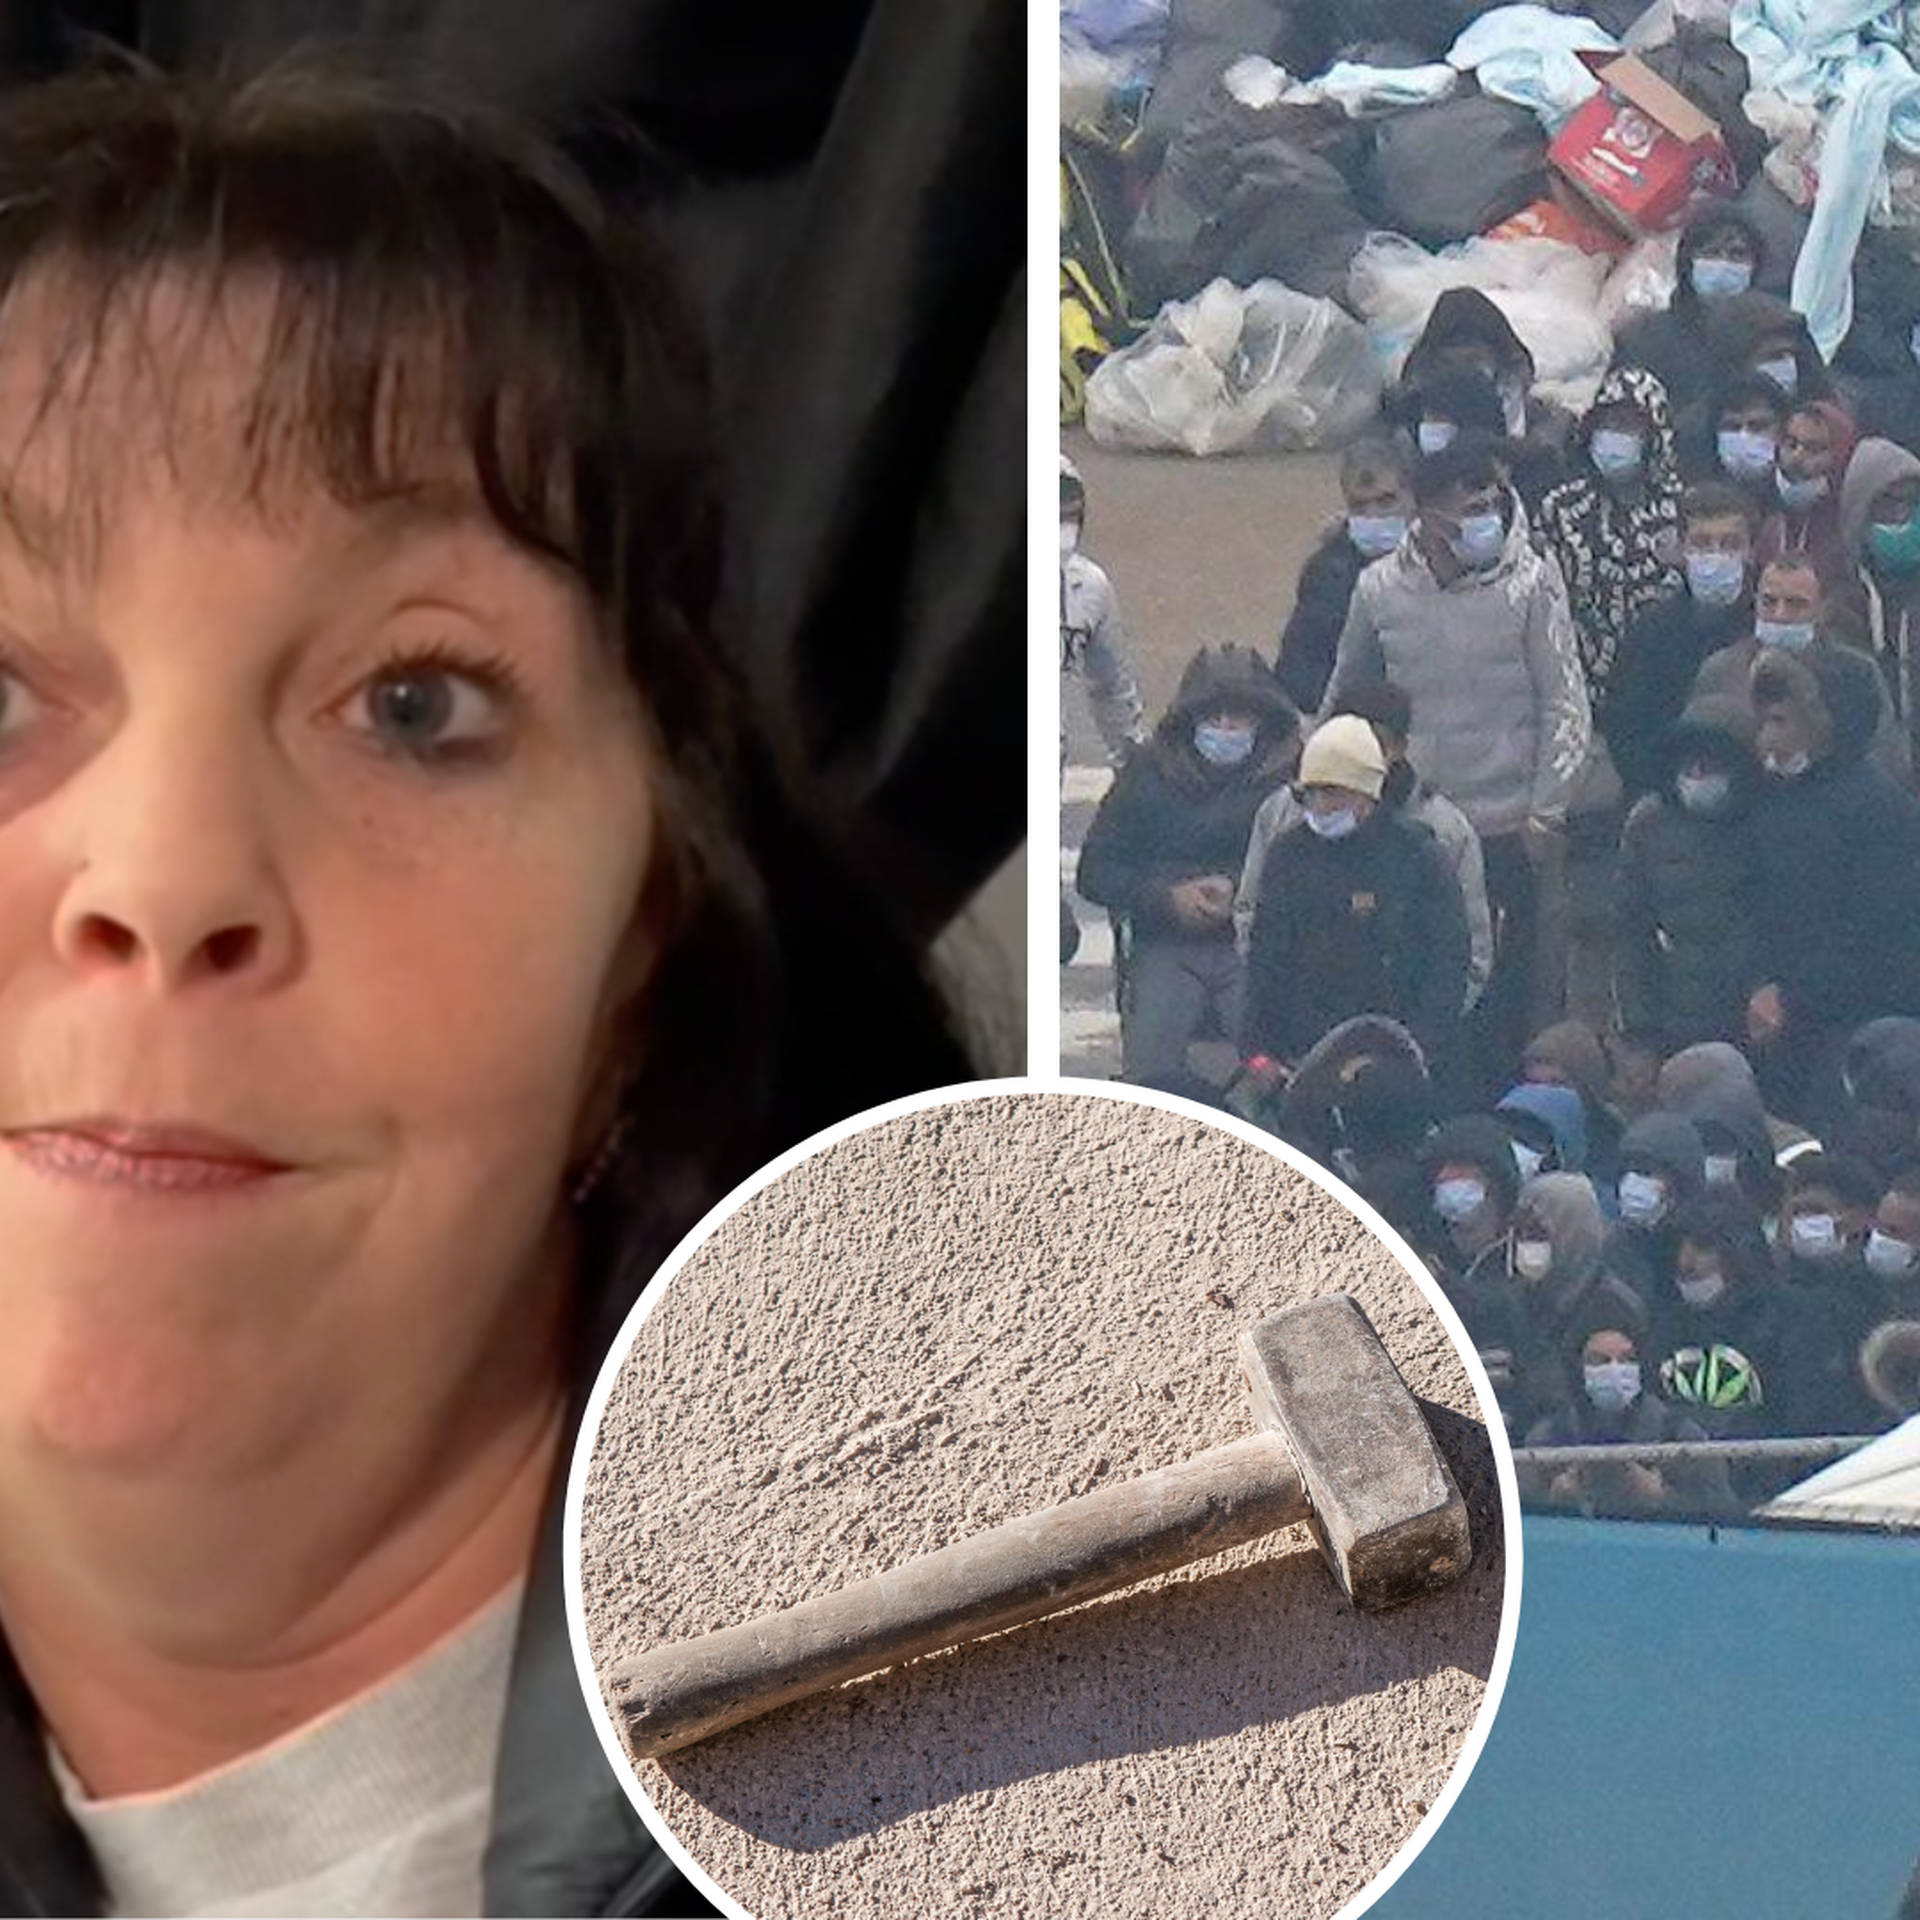 I sleep with a sledgehammer next to my bed after a migrant tried ...